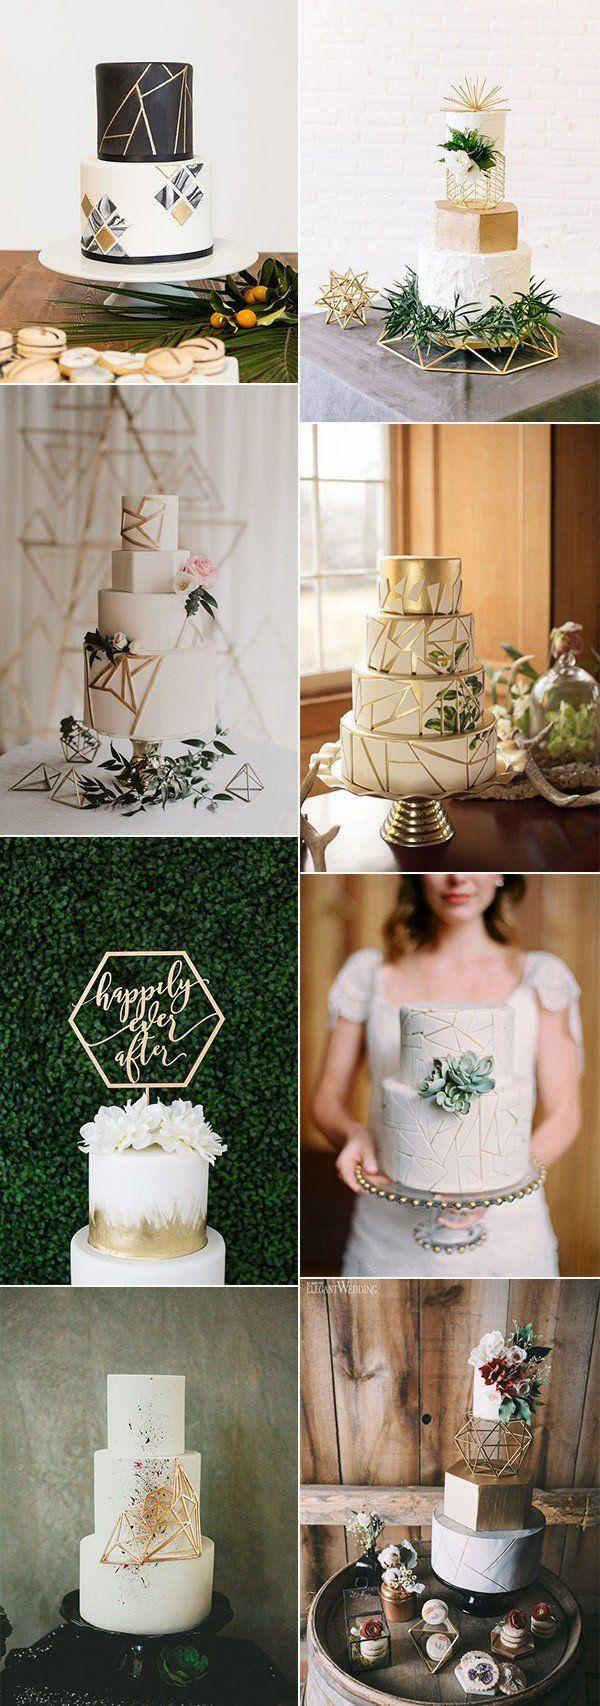 Wedding - 40  Chic Geometric Wedding Ideas For 2018 Trends - Page 5 Of 5